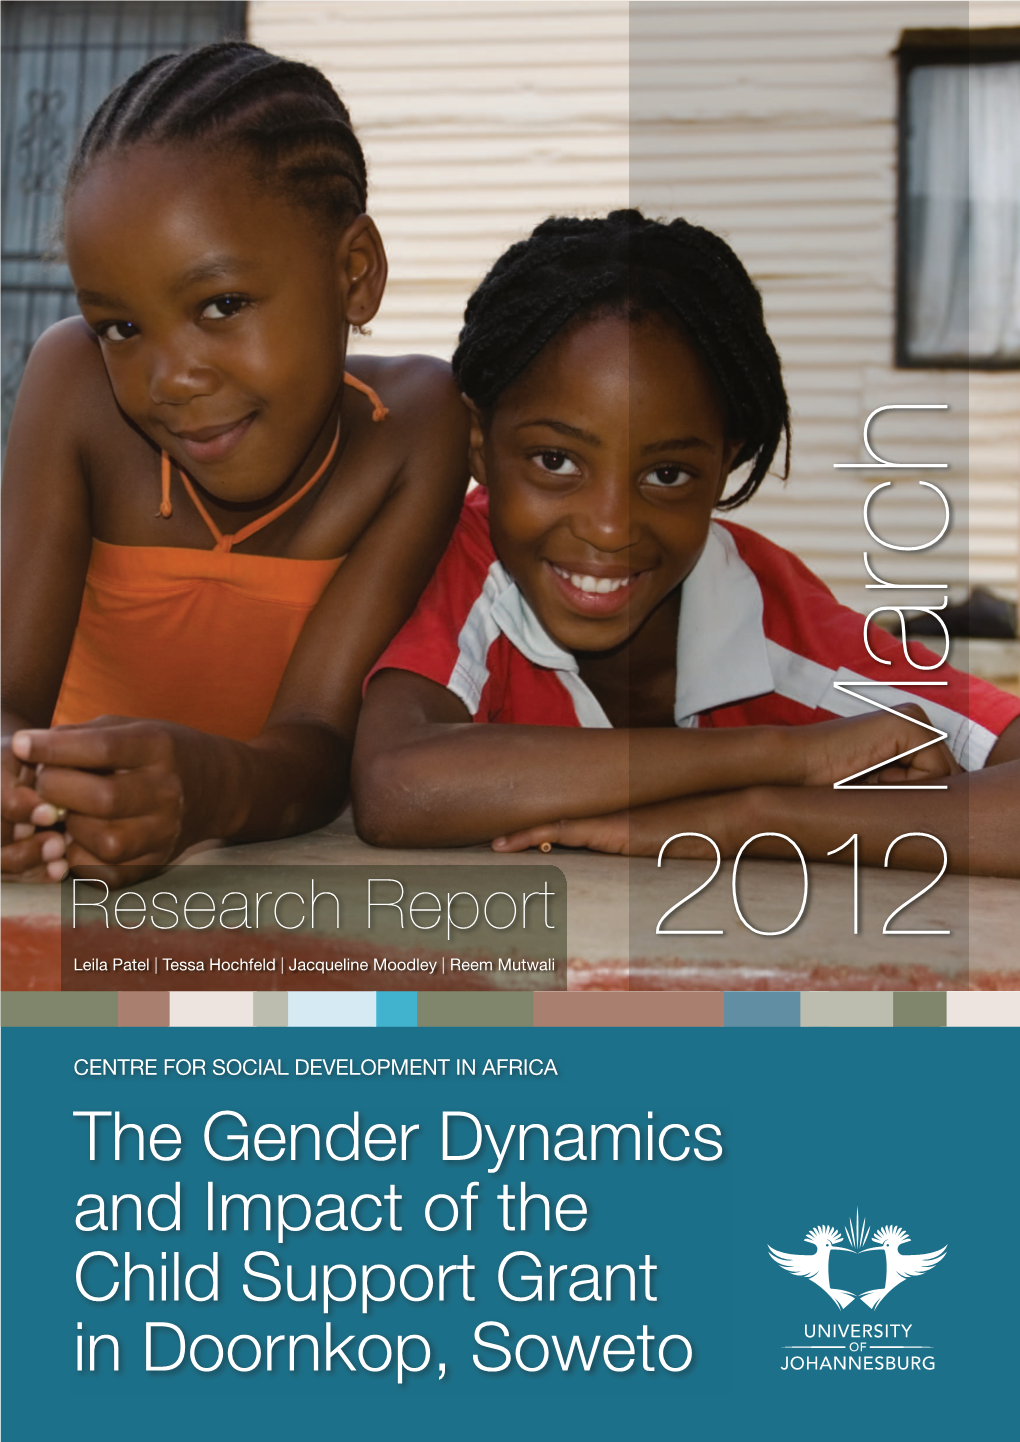 The Gender Dynamics and Impact of the Child Support Grant in Doornkop, Soweto Contents